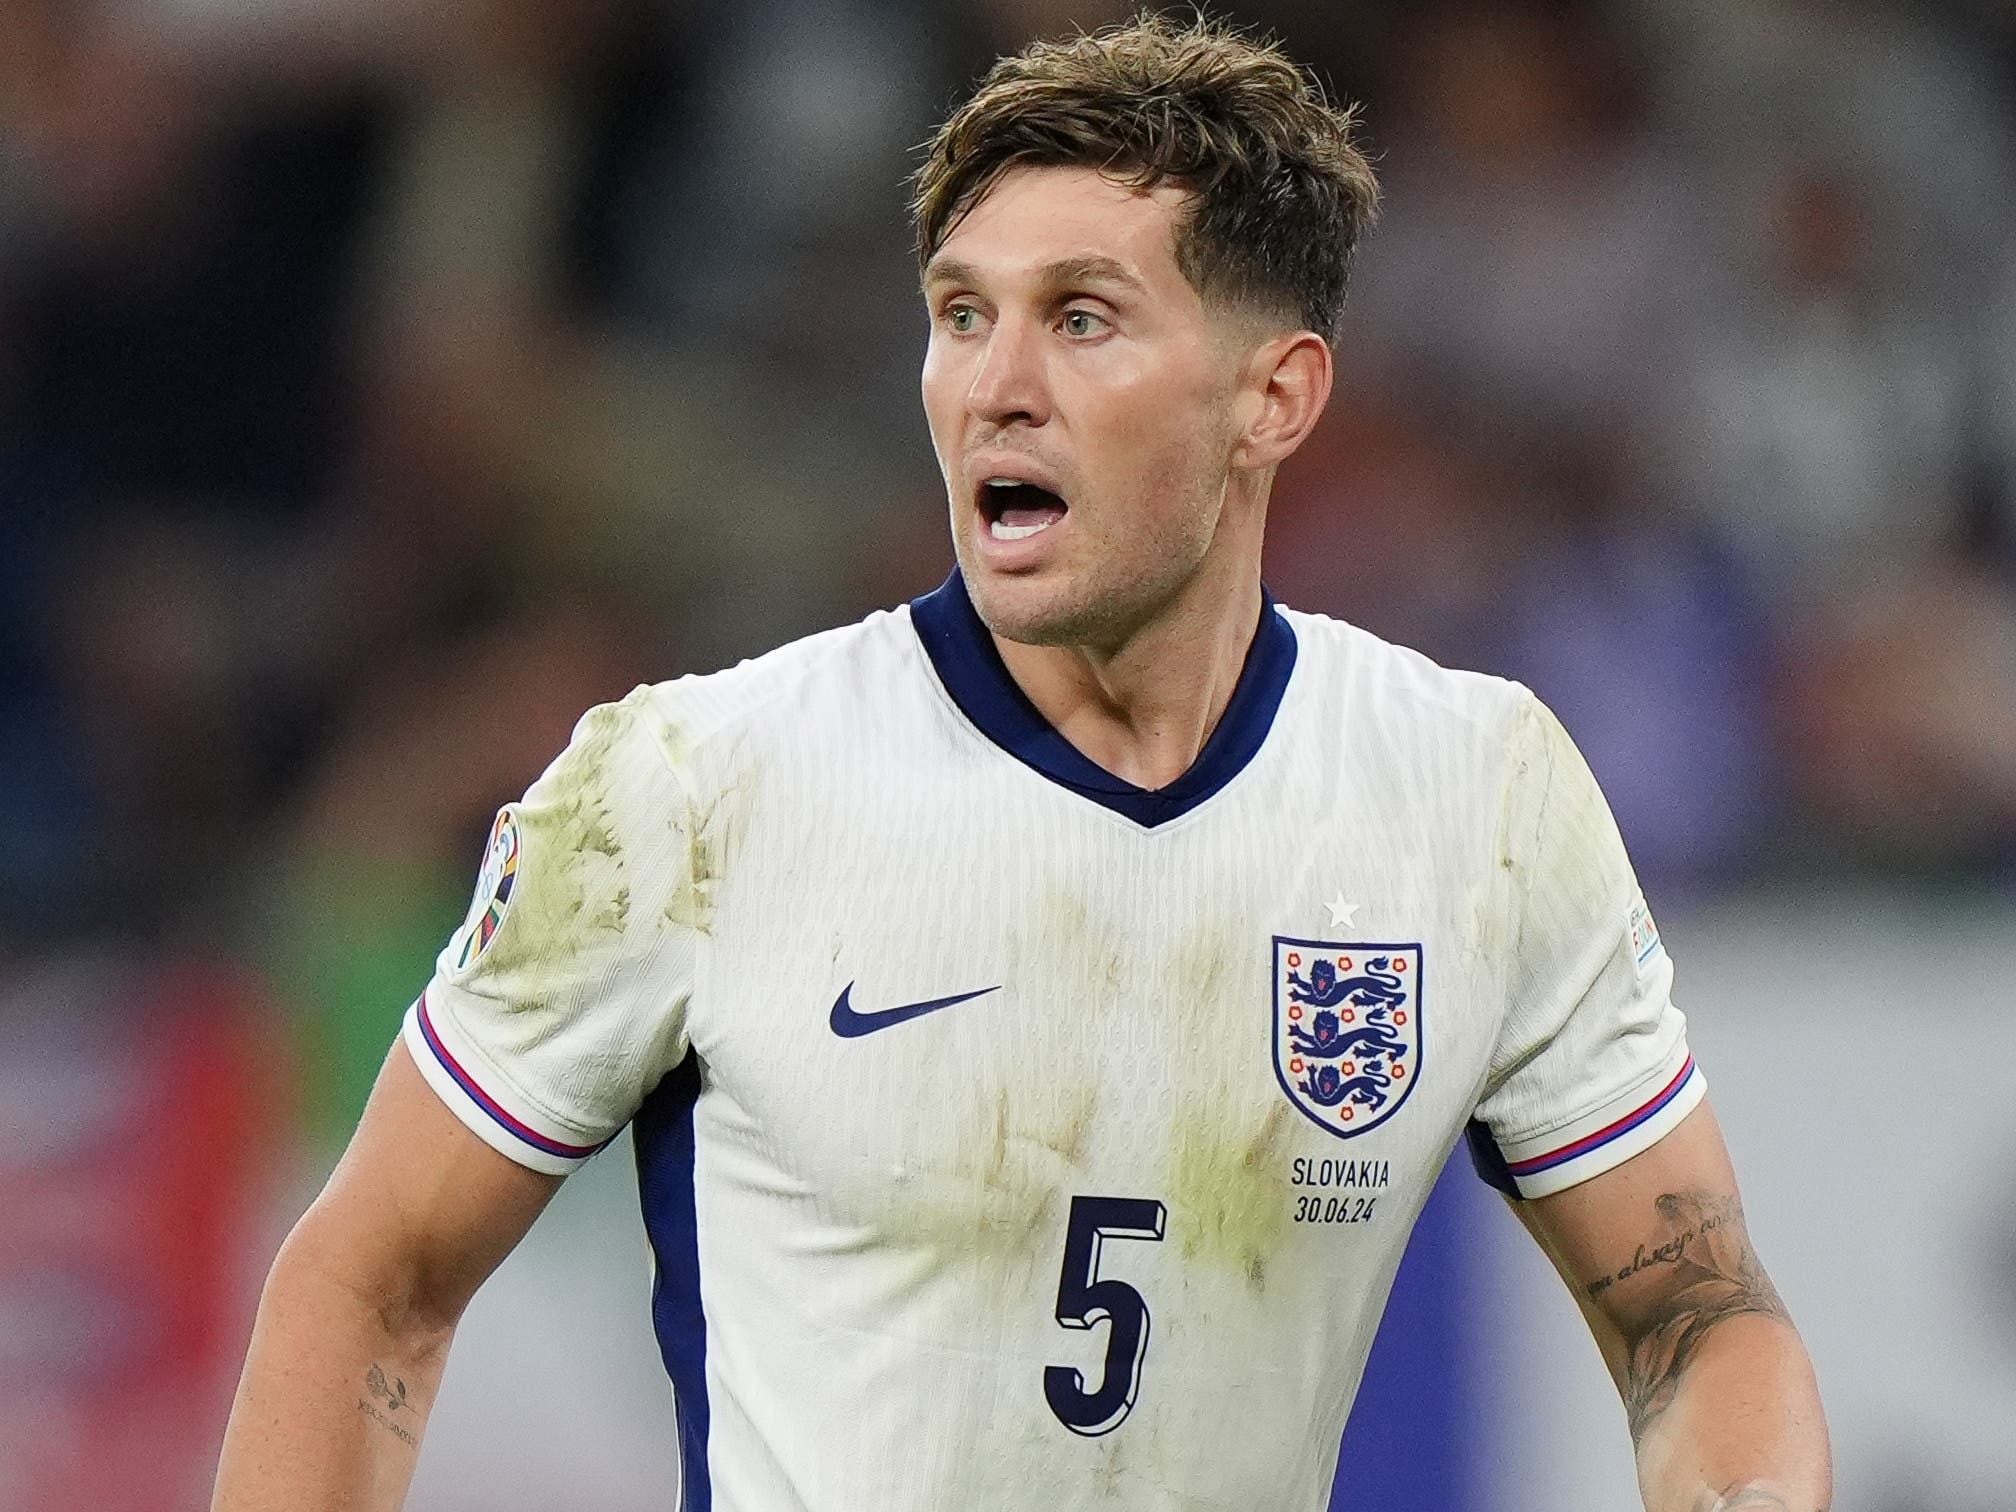 John Stones urges England to ‘take the handbrake off’ after reaching last eight